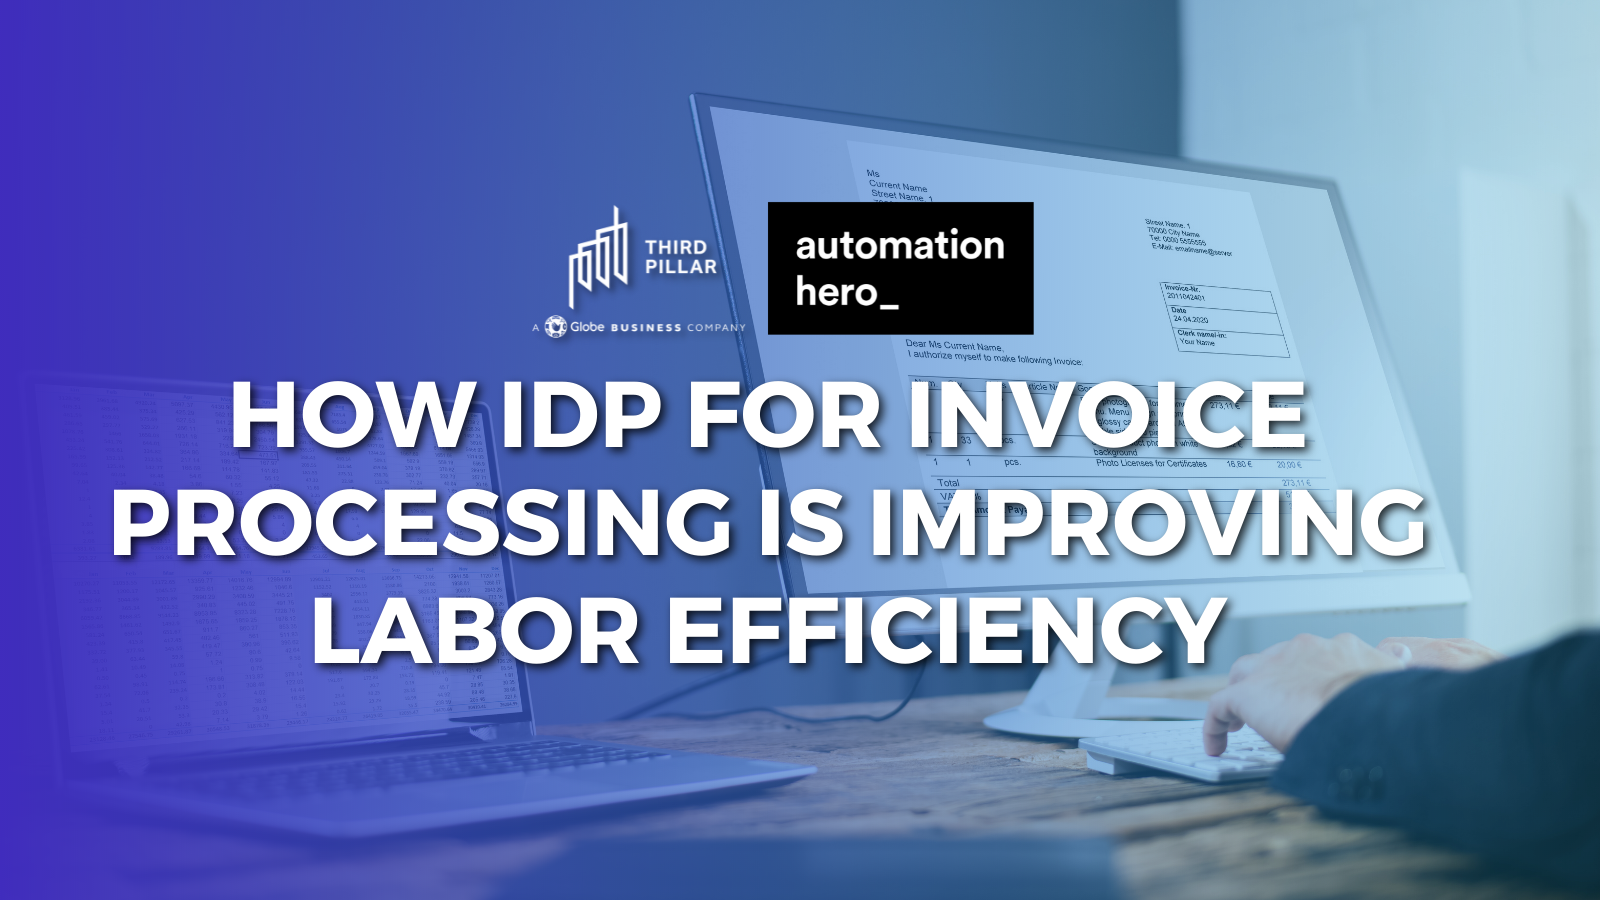 How IDP for invoice processing is improving labor efficiency